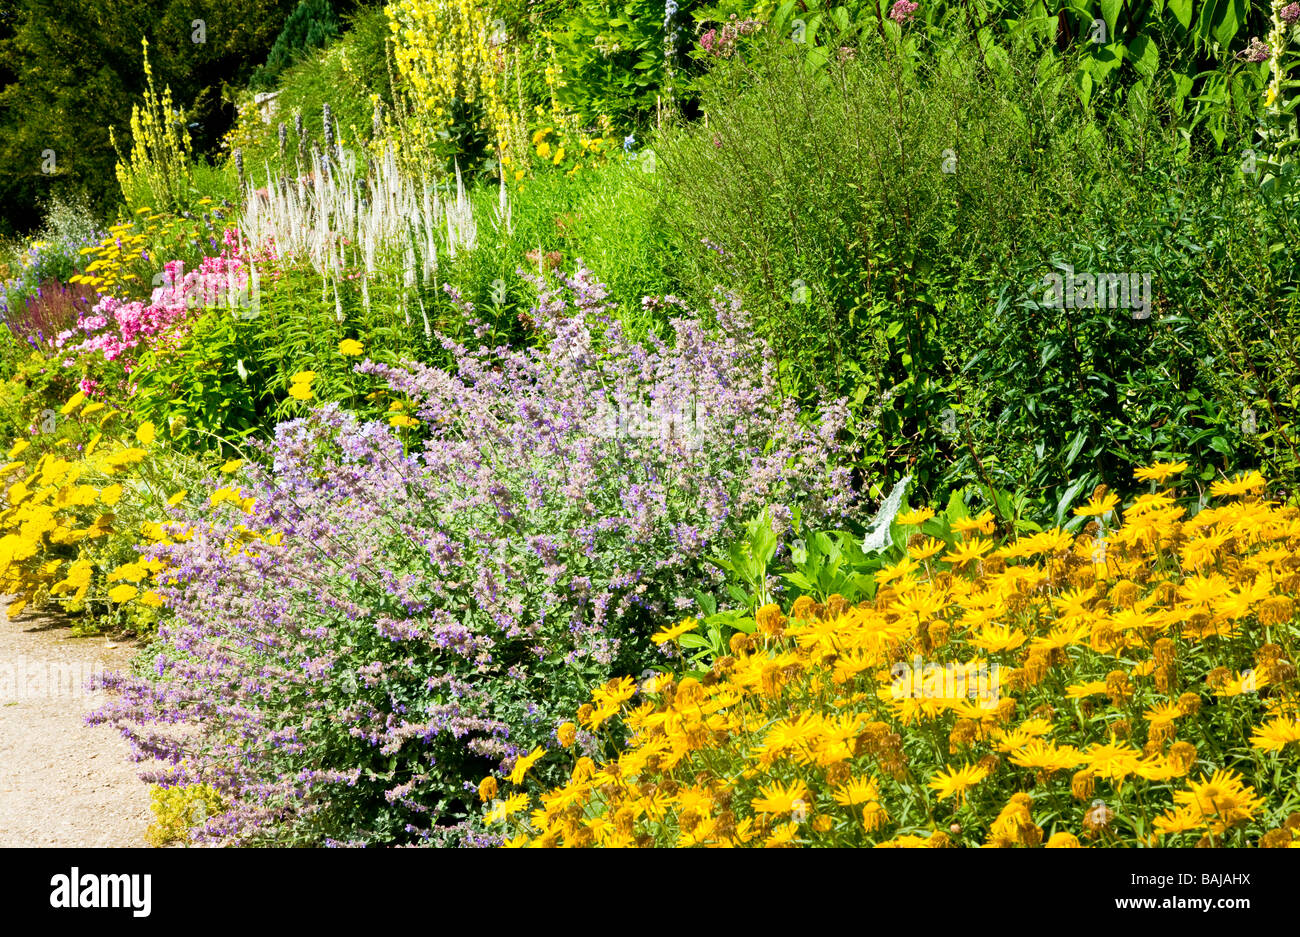 Part of the herbaceous border at Waterperry Gardens, Wheatley, Oxfordshire,Oxon, England, UK Stock Photo